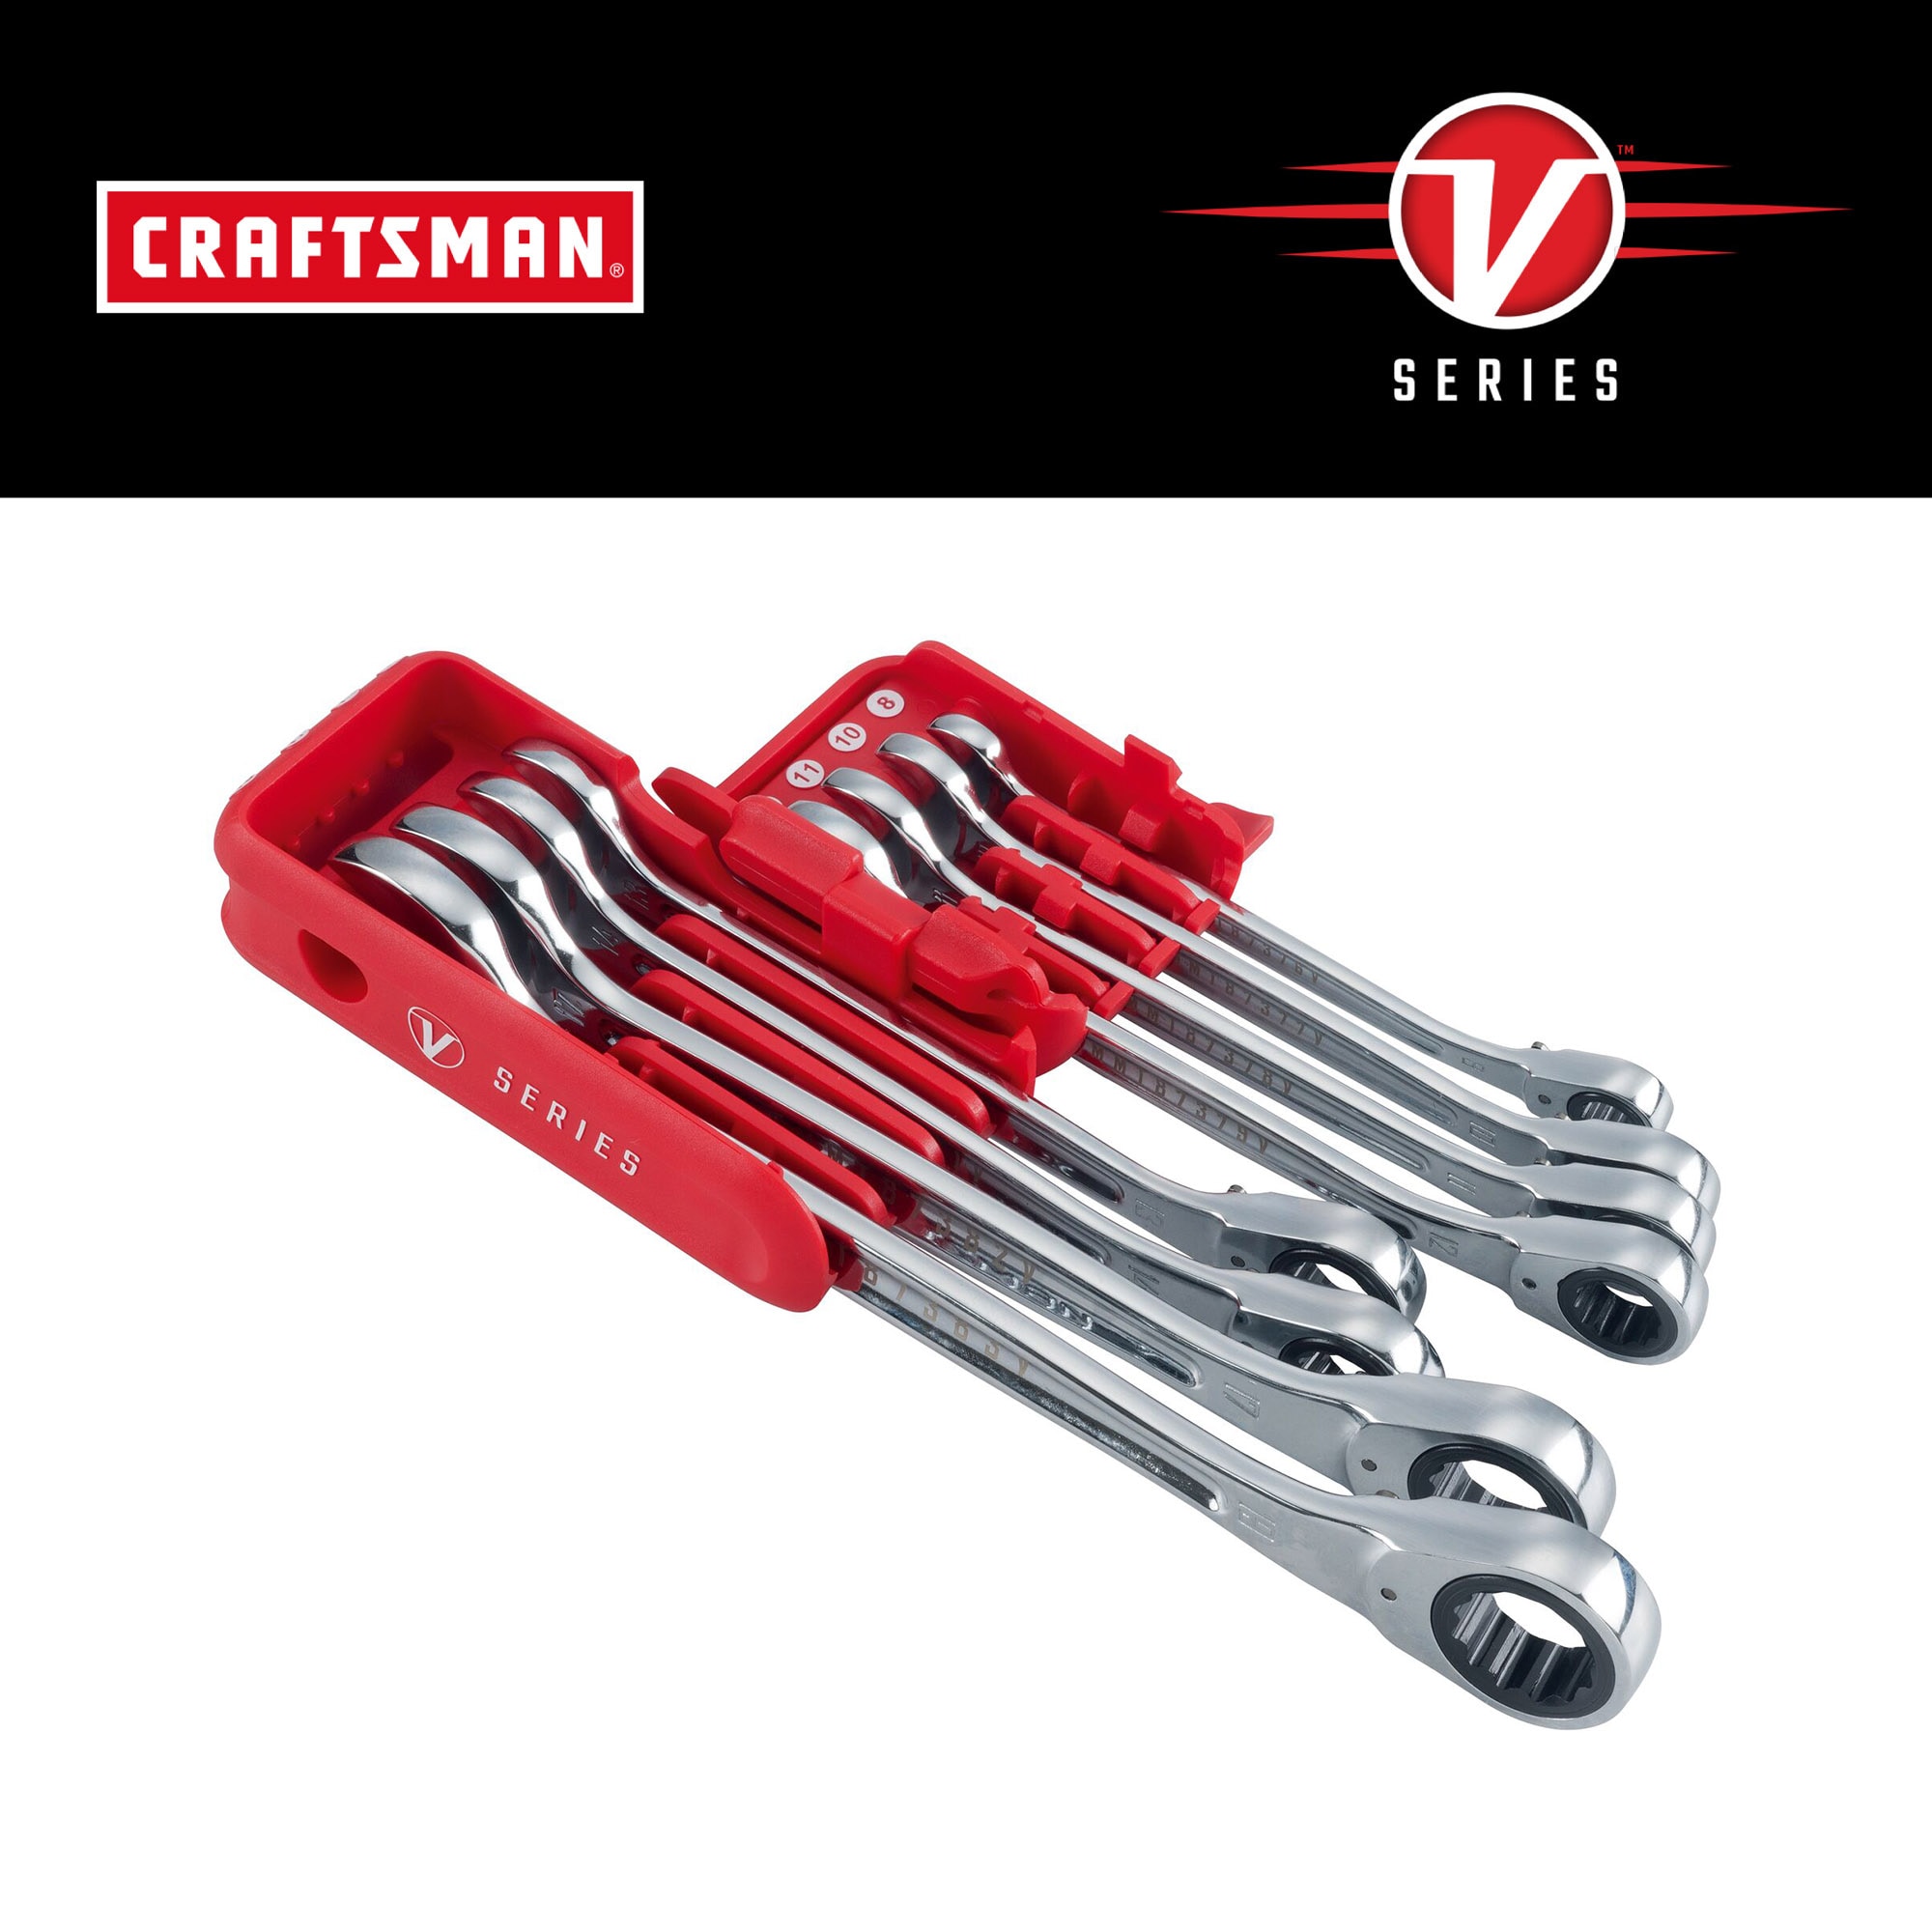 CRAFTSMAN V-Series 8-Piece Set Metric Ratchet Wrench in the